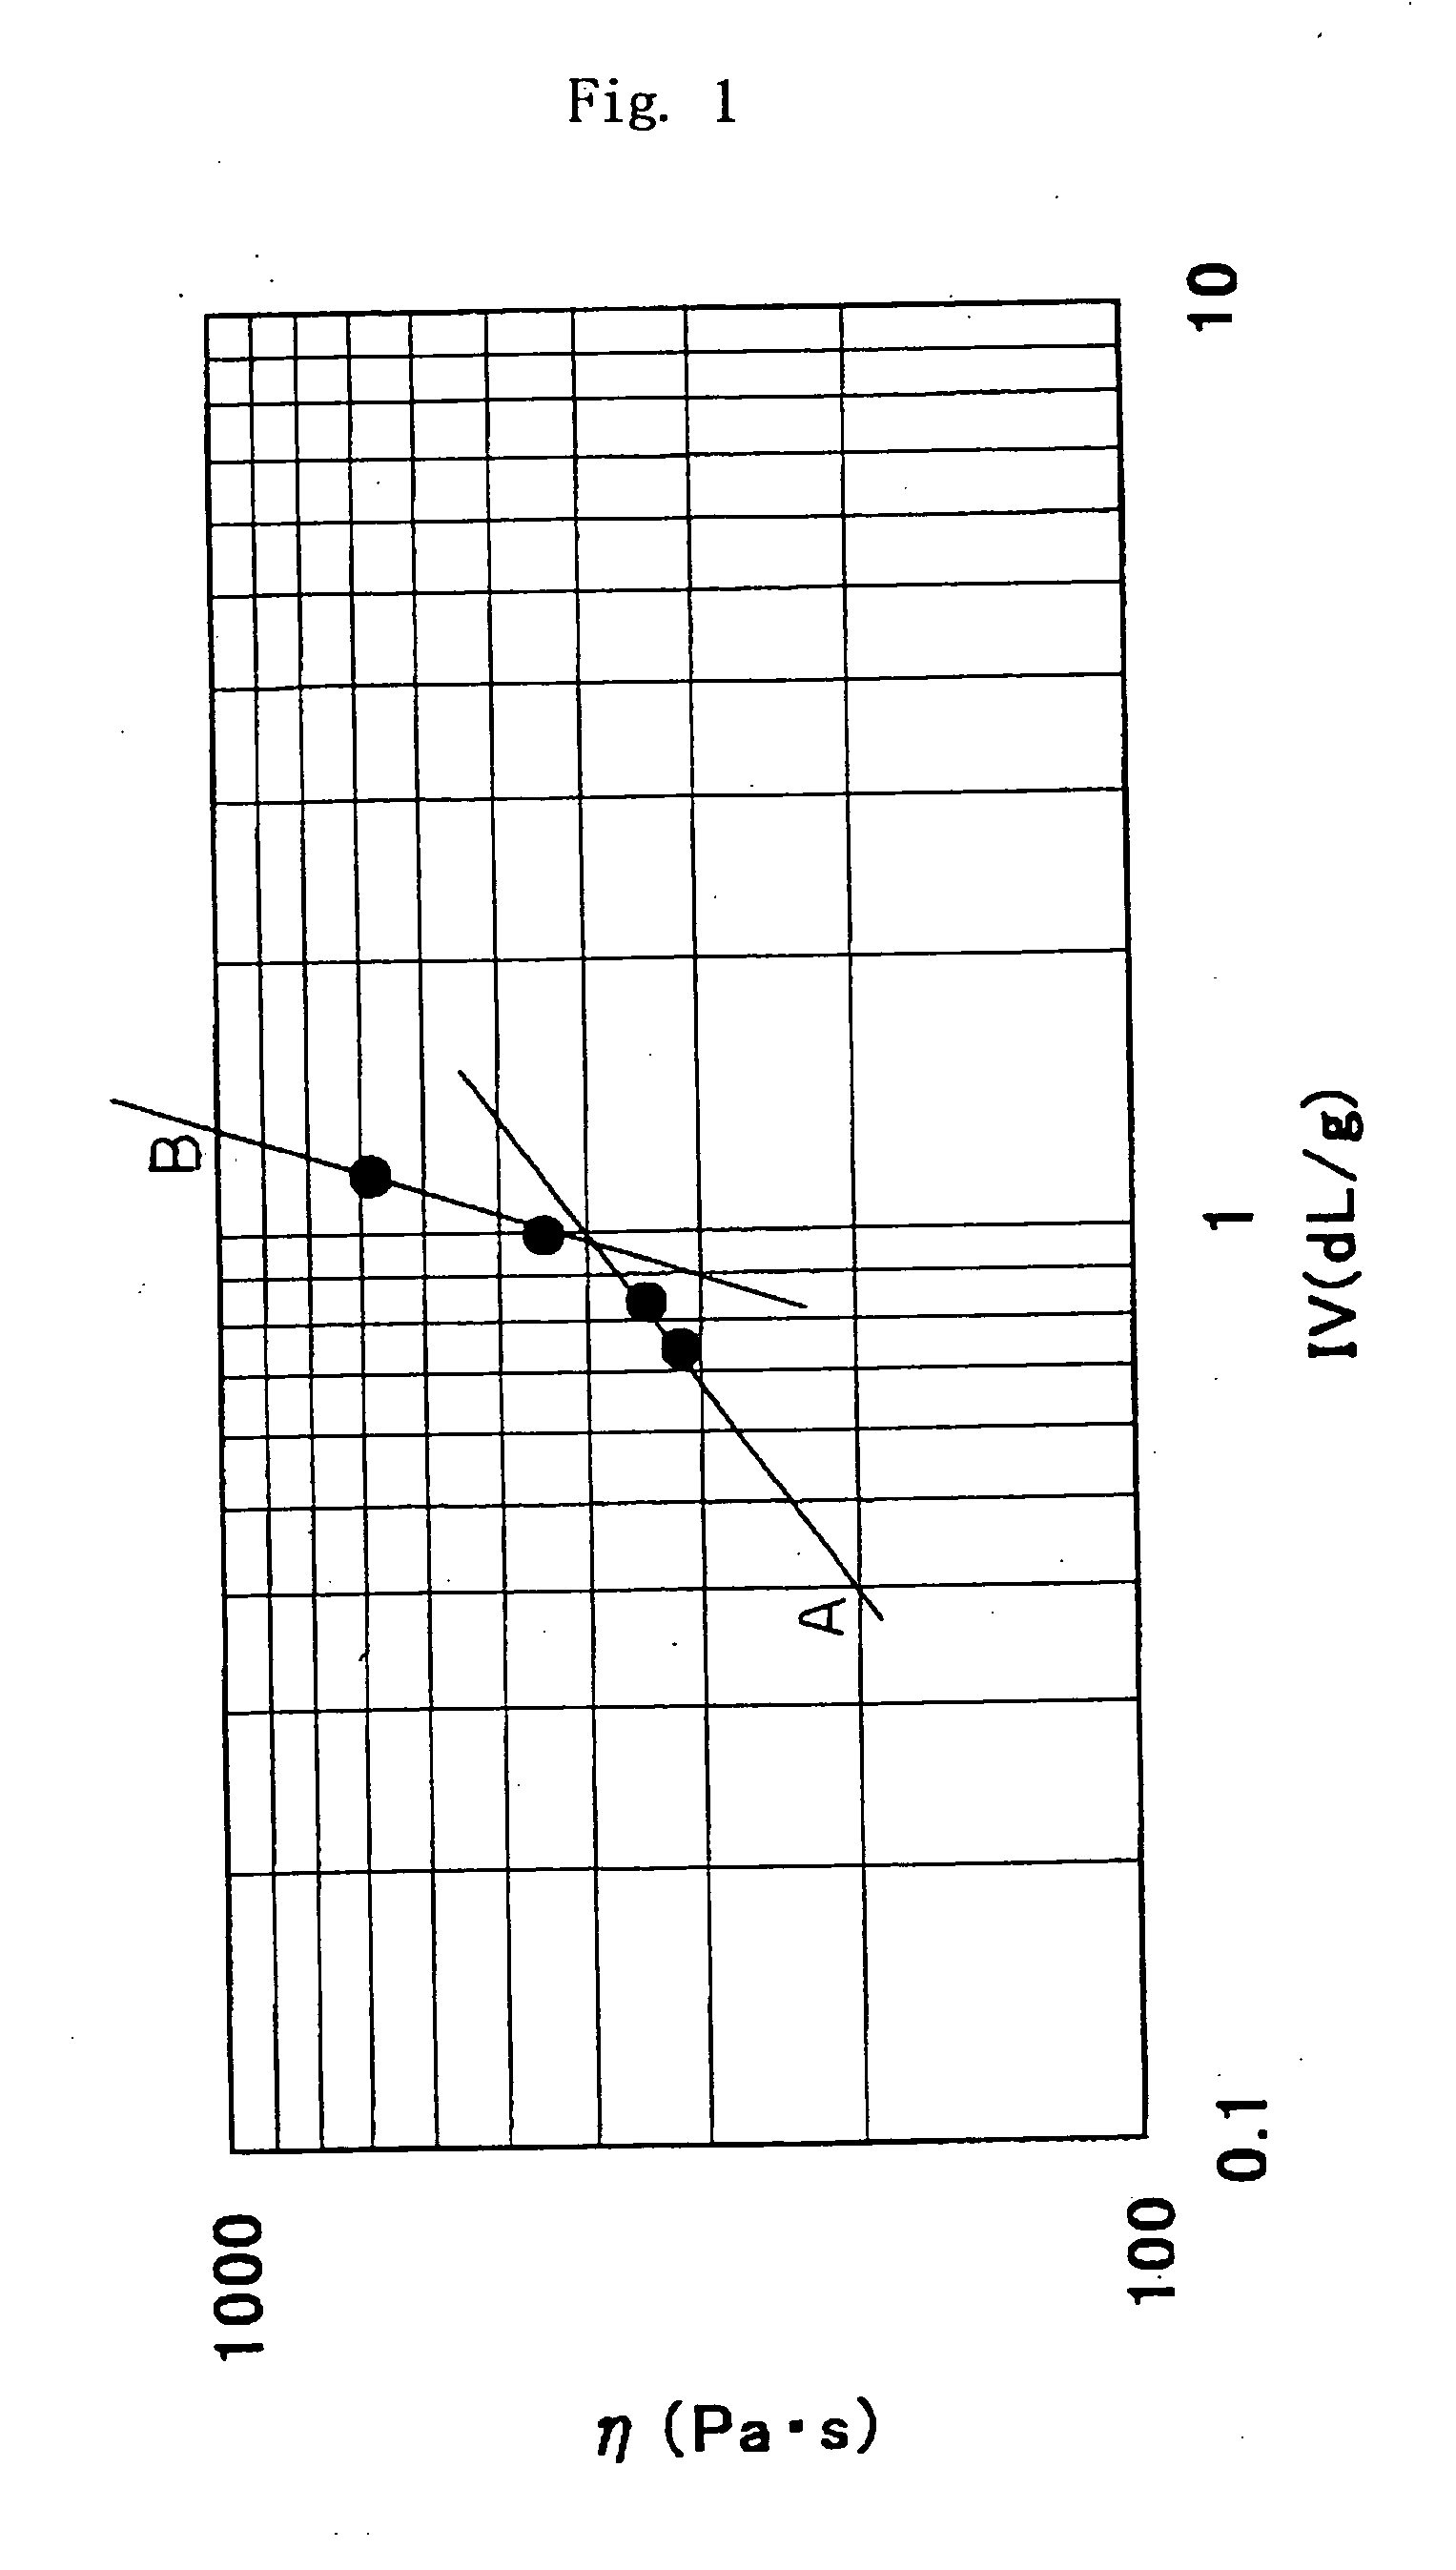 Polyester Resin for Compression Forming, Method of Producing the Same and Method of Producing Preforms